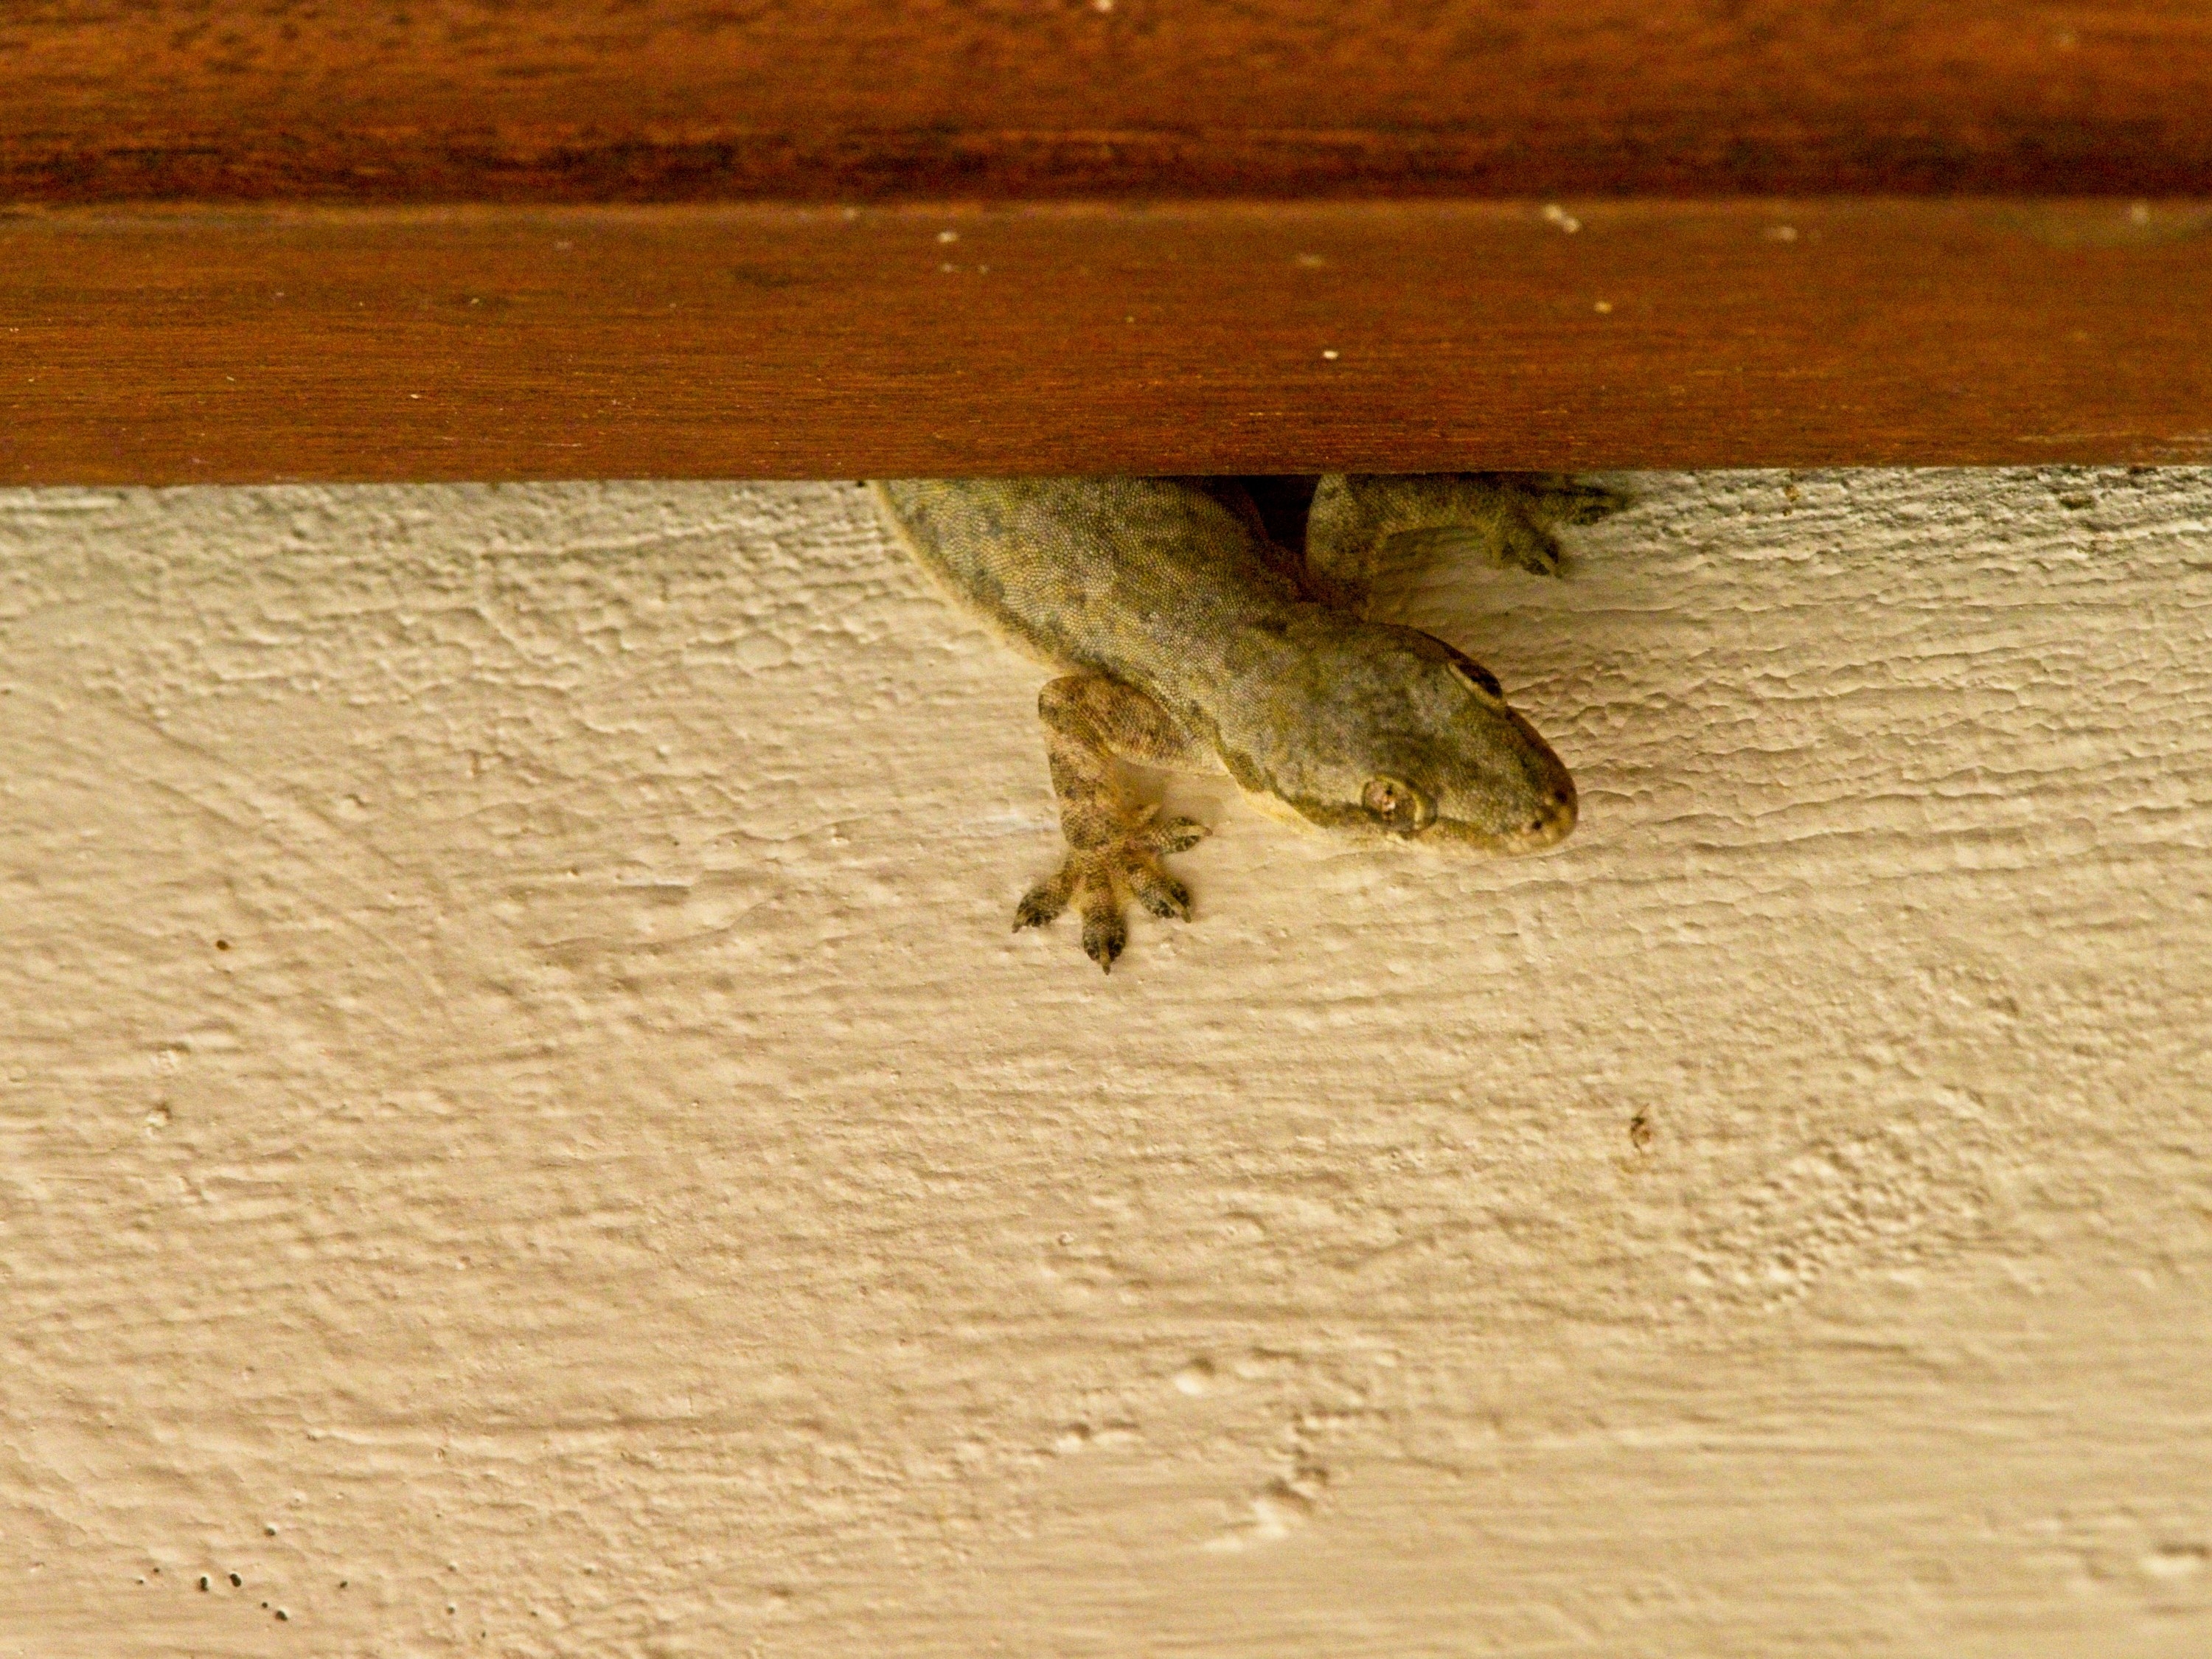 a common house gecko on the wall in Bali, Indonesia